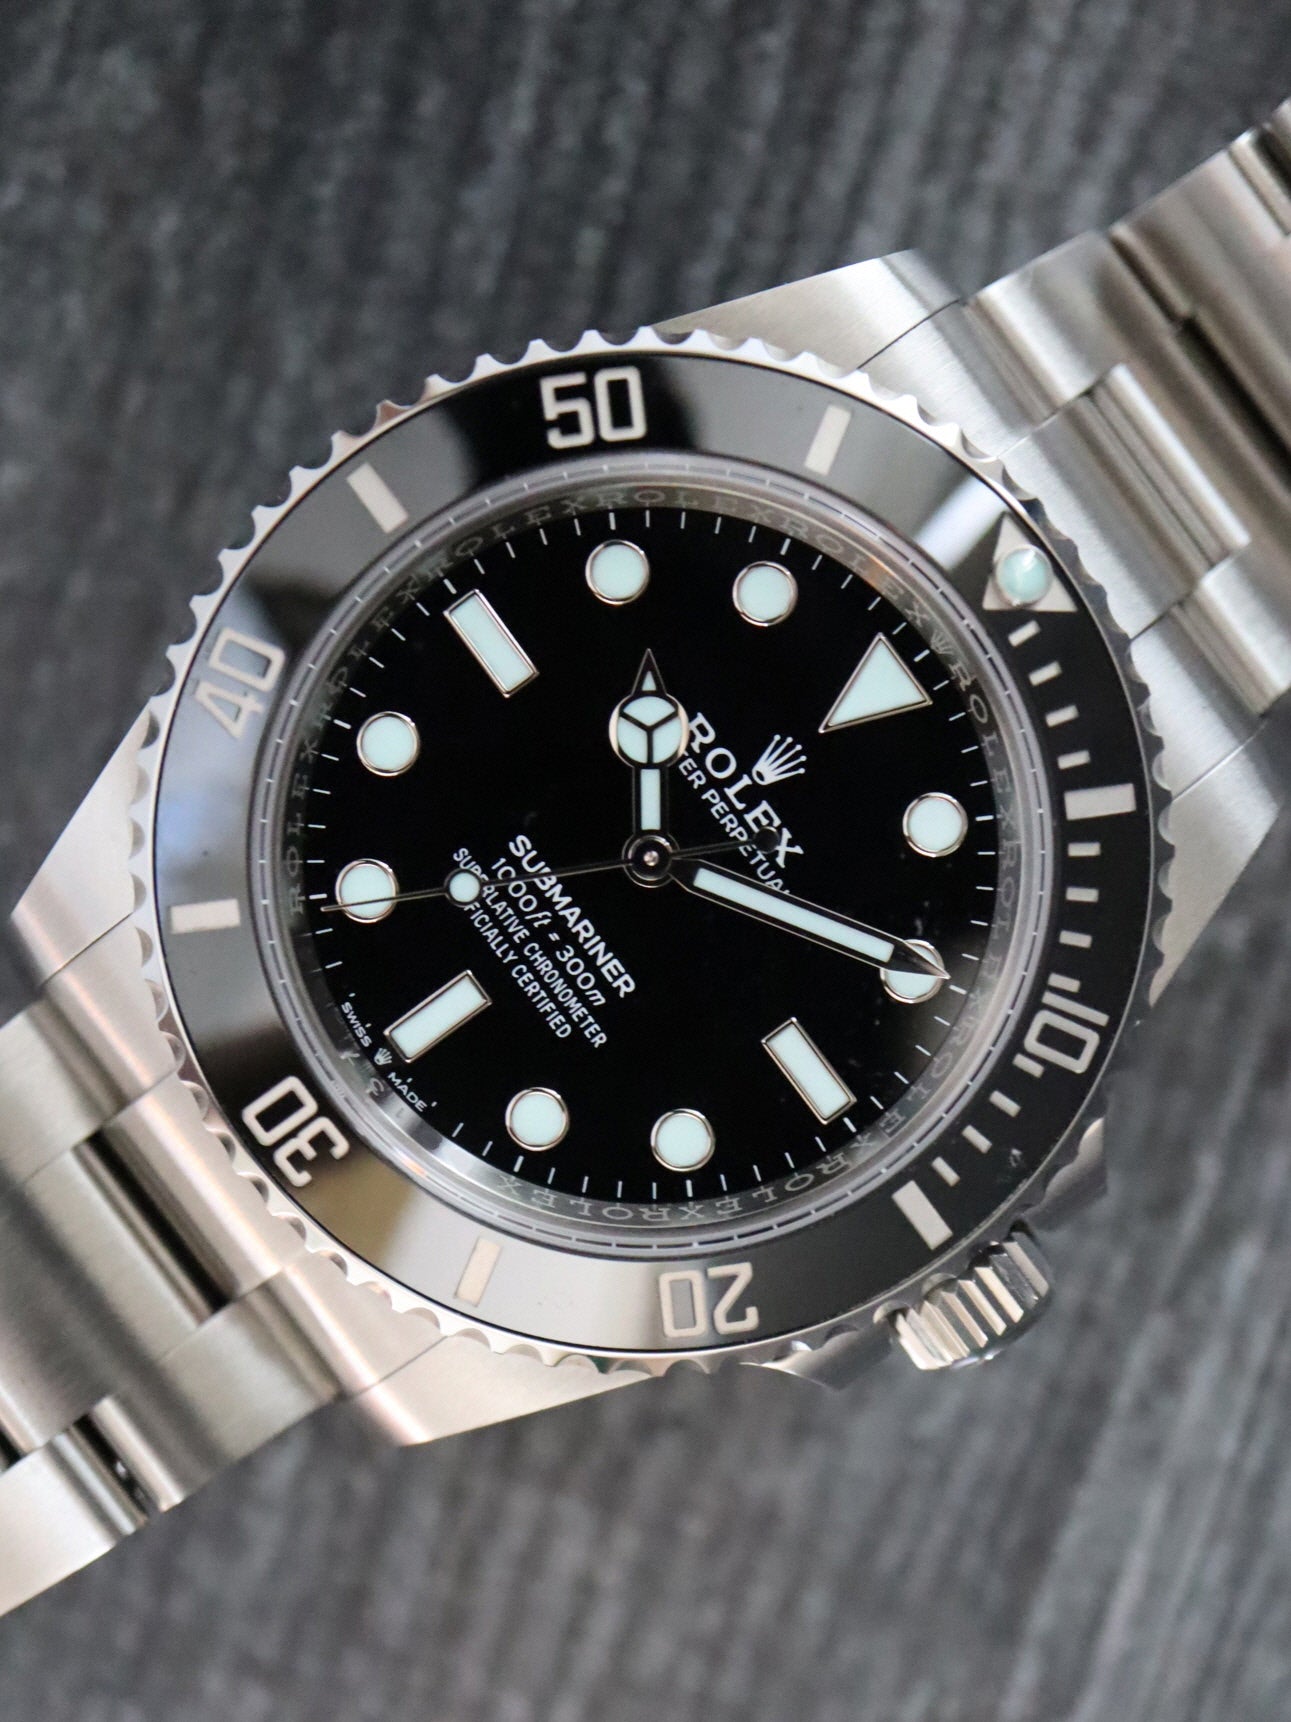 Logisk Rang mus 38804: Rolex Submariner "No Date", Ref. 124060, Box and 2023 Card – Paul  Duggan Fine Watches